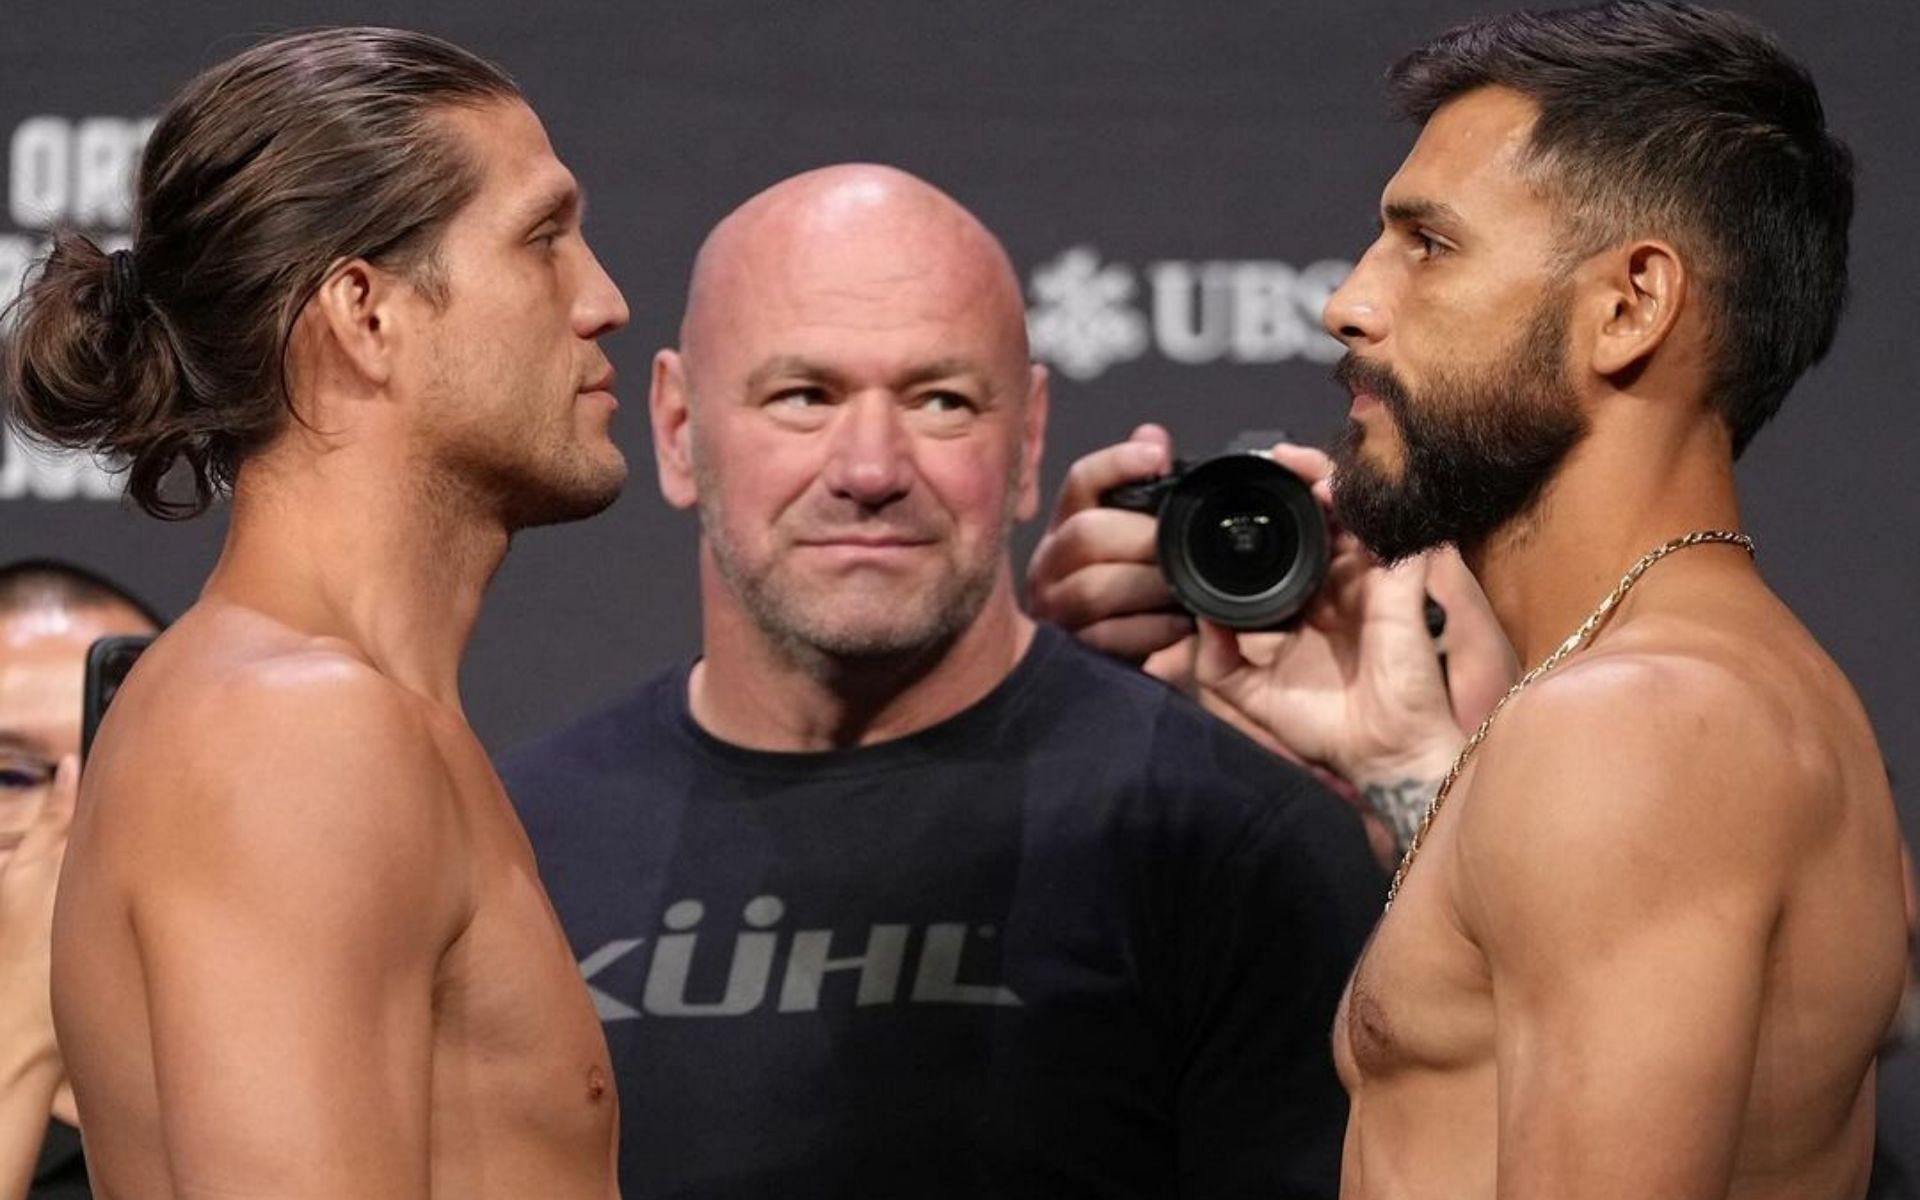 Brian Ortega and Yair Rodriguez faced off in a rematch on Feb. 24 [Image credits: @ufceurasia on Instagram]